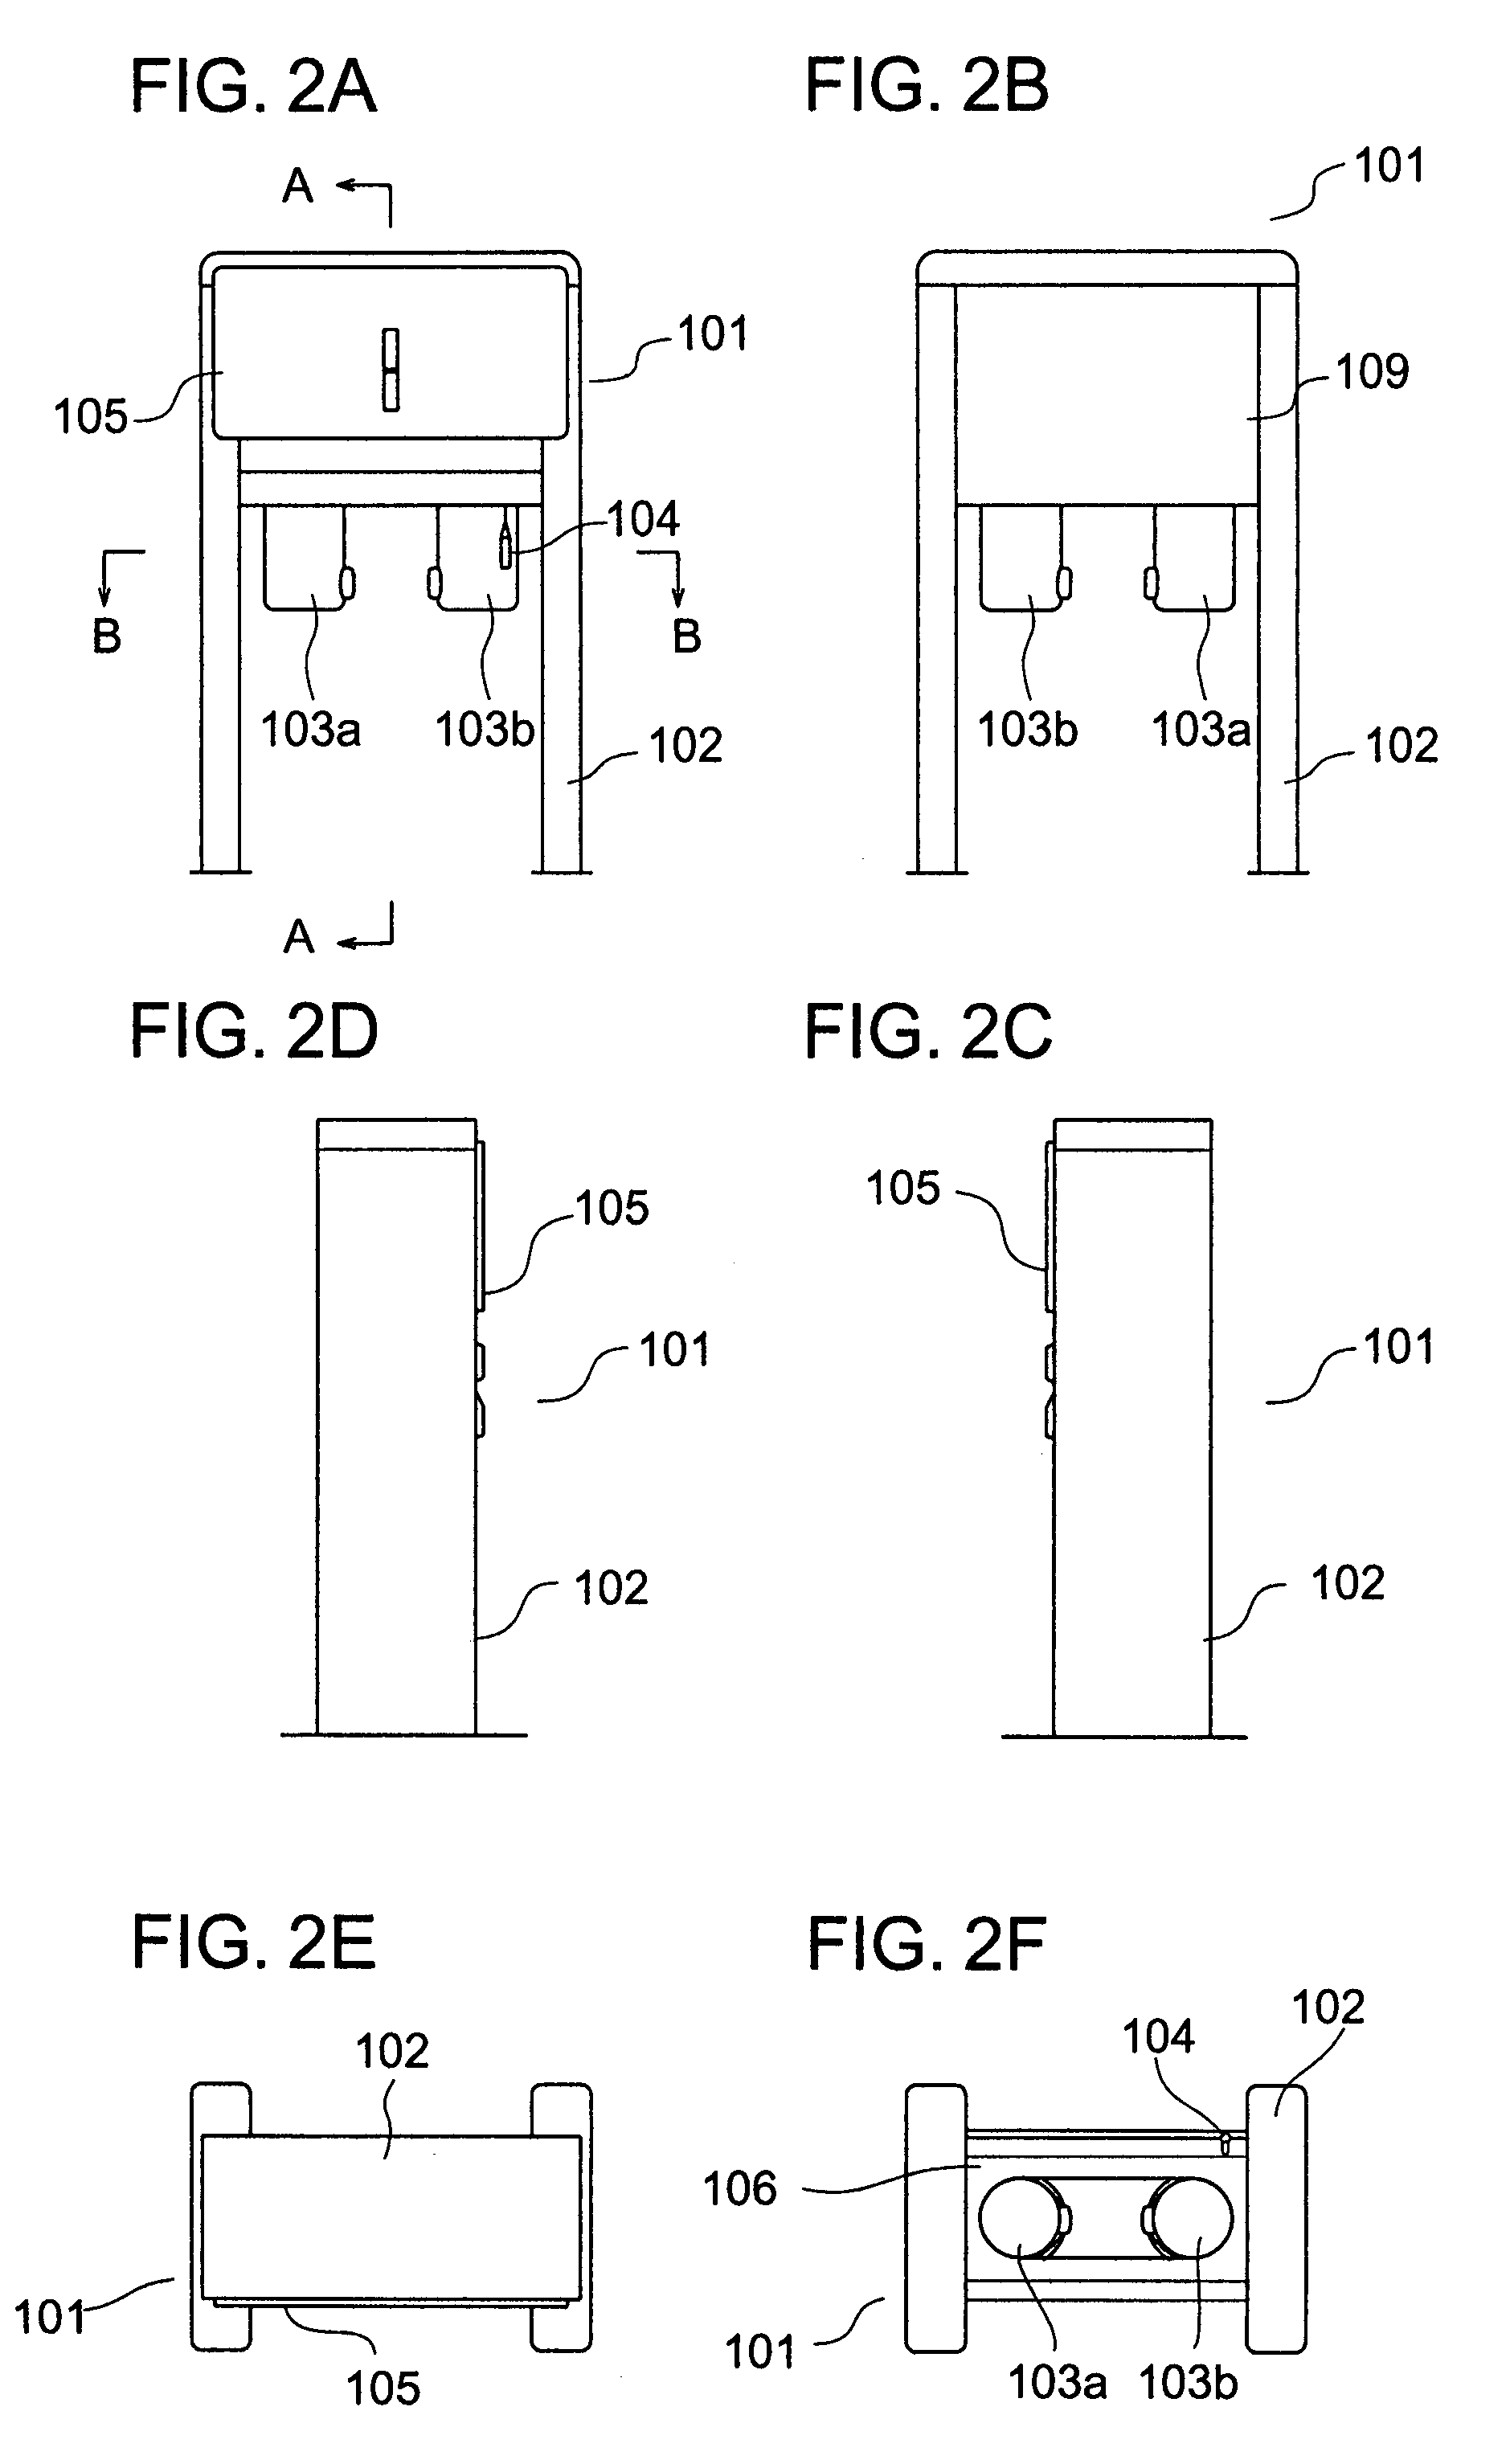 Biomagnetic field measurement apparatus having a plurality of magnetic pick-up coils